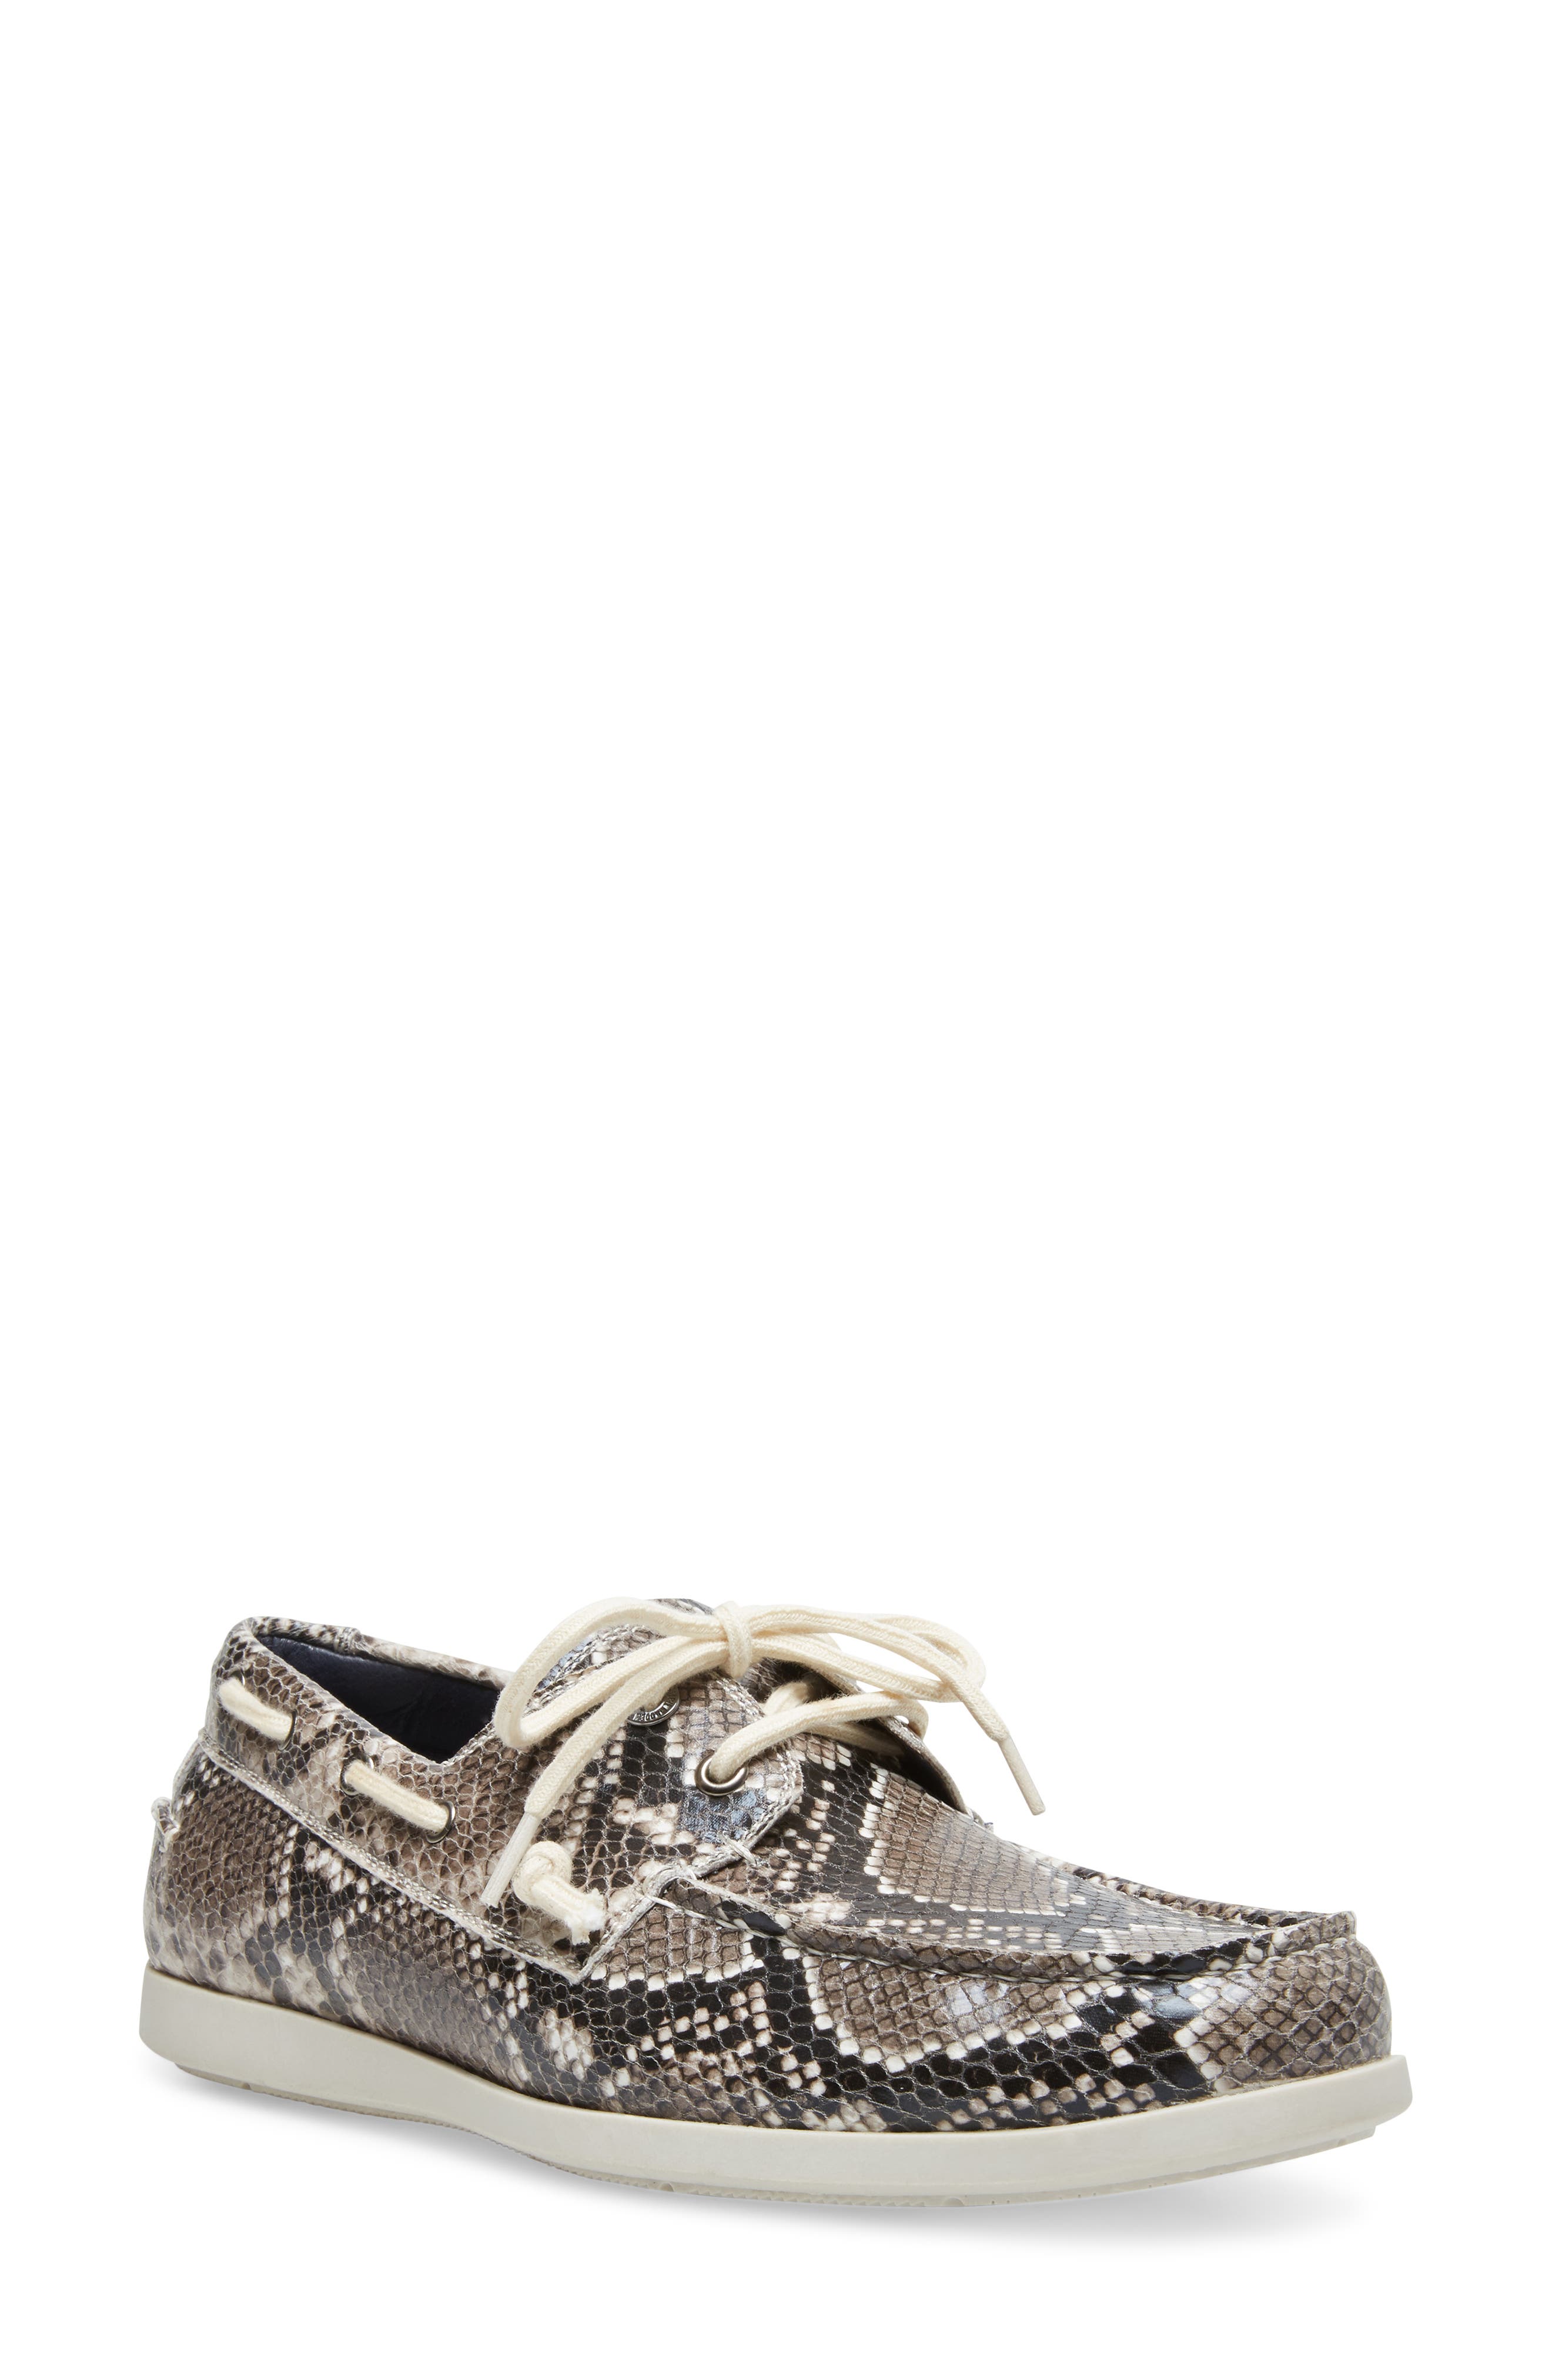 madden boat shoes